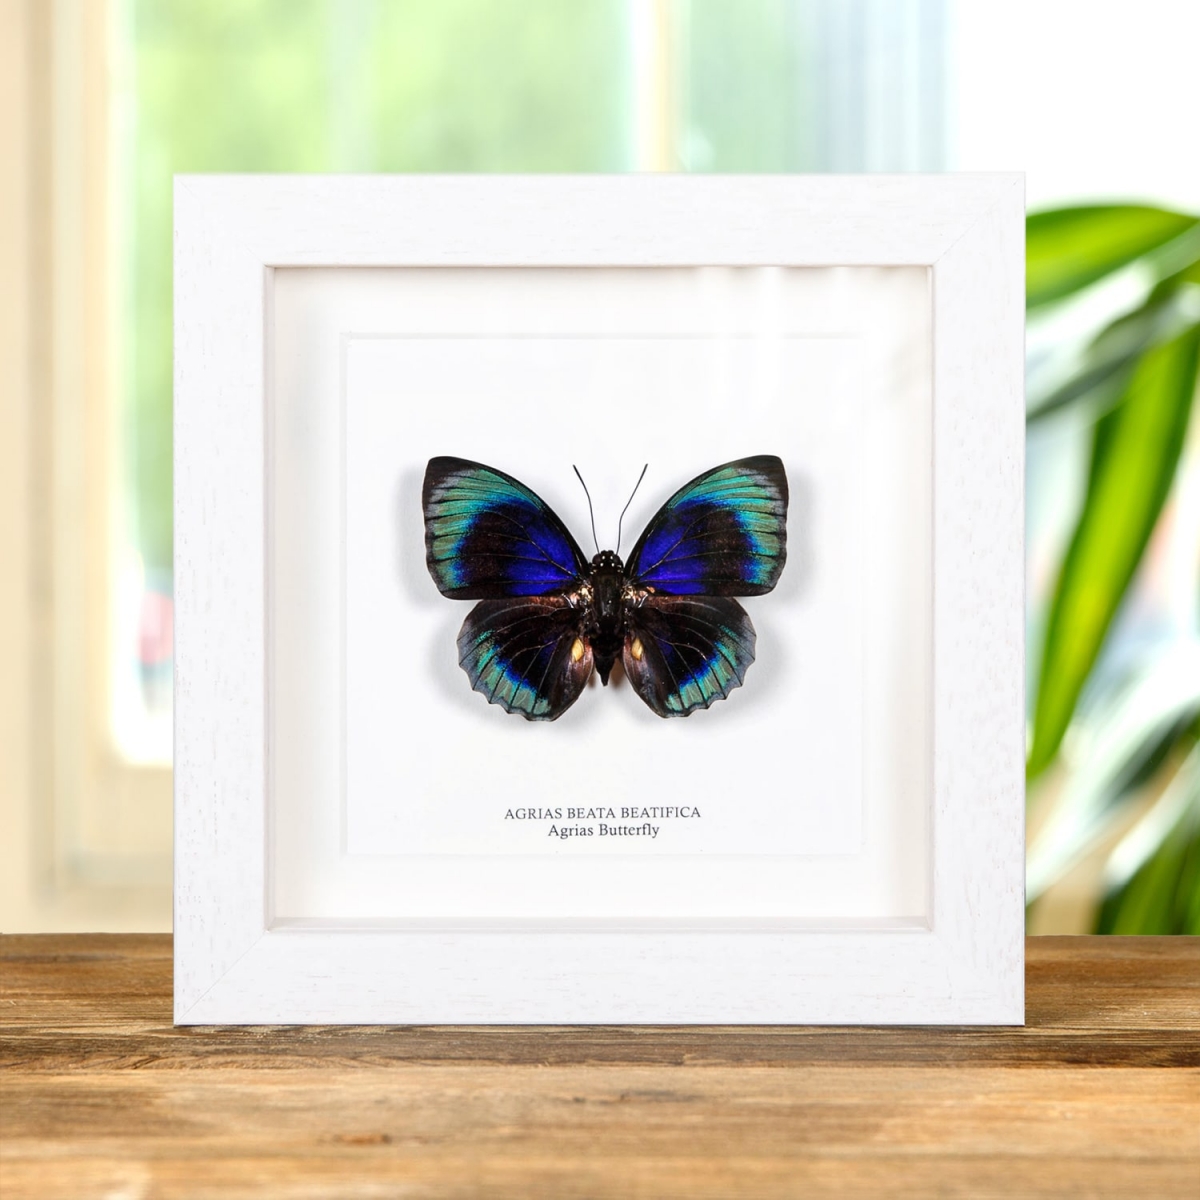 Agrias Butterfly In Box Frame (Agrias beata beatifica)